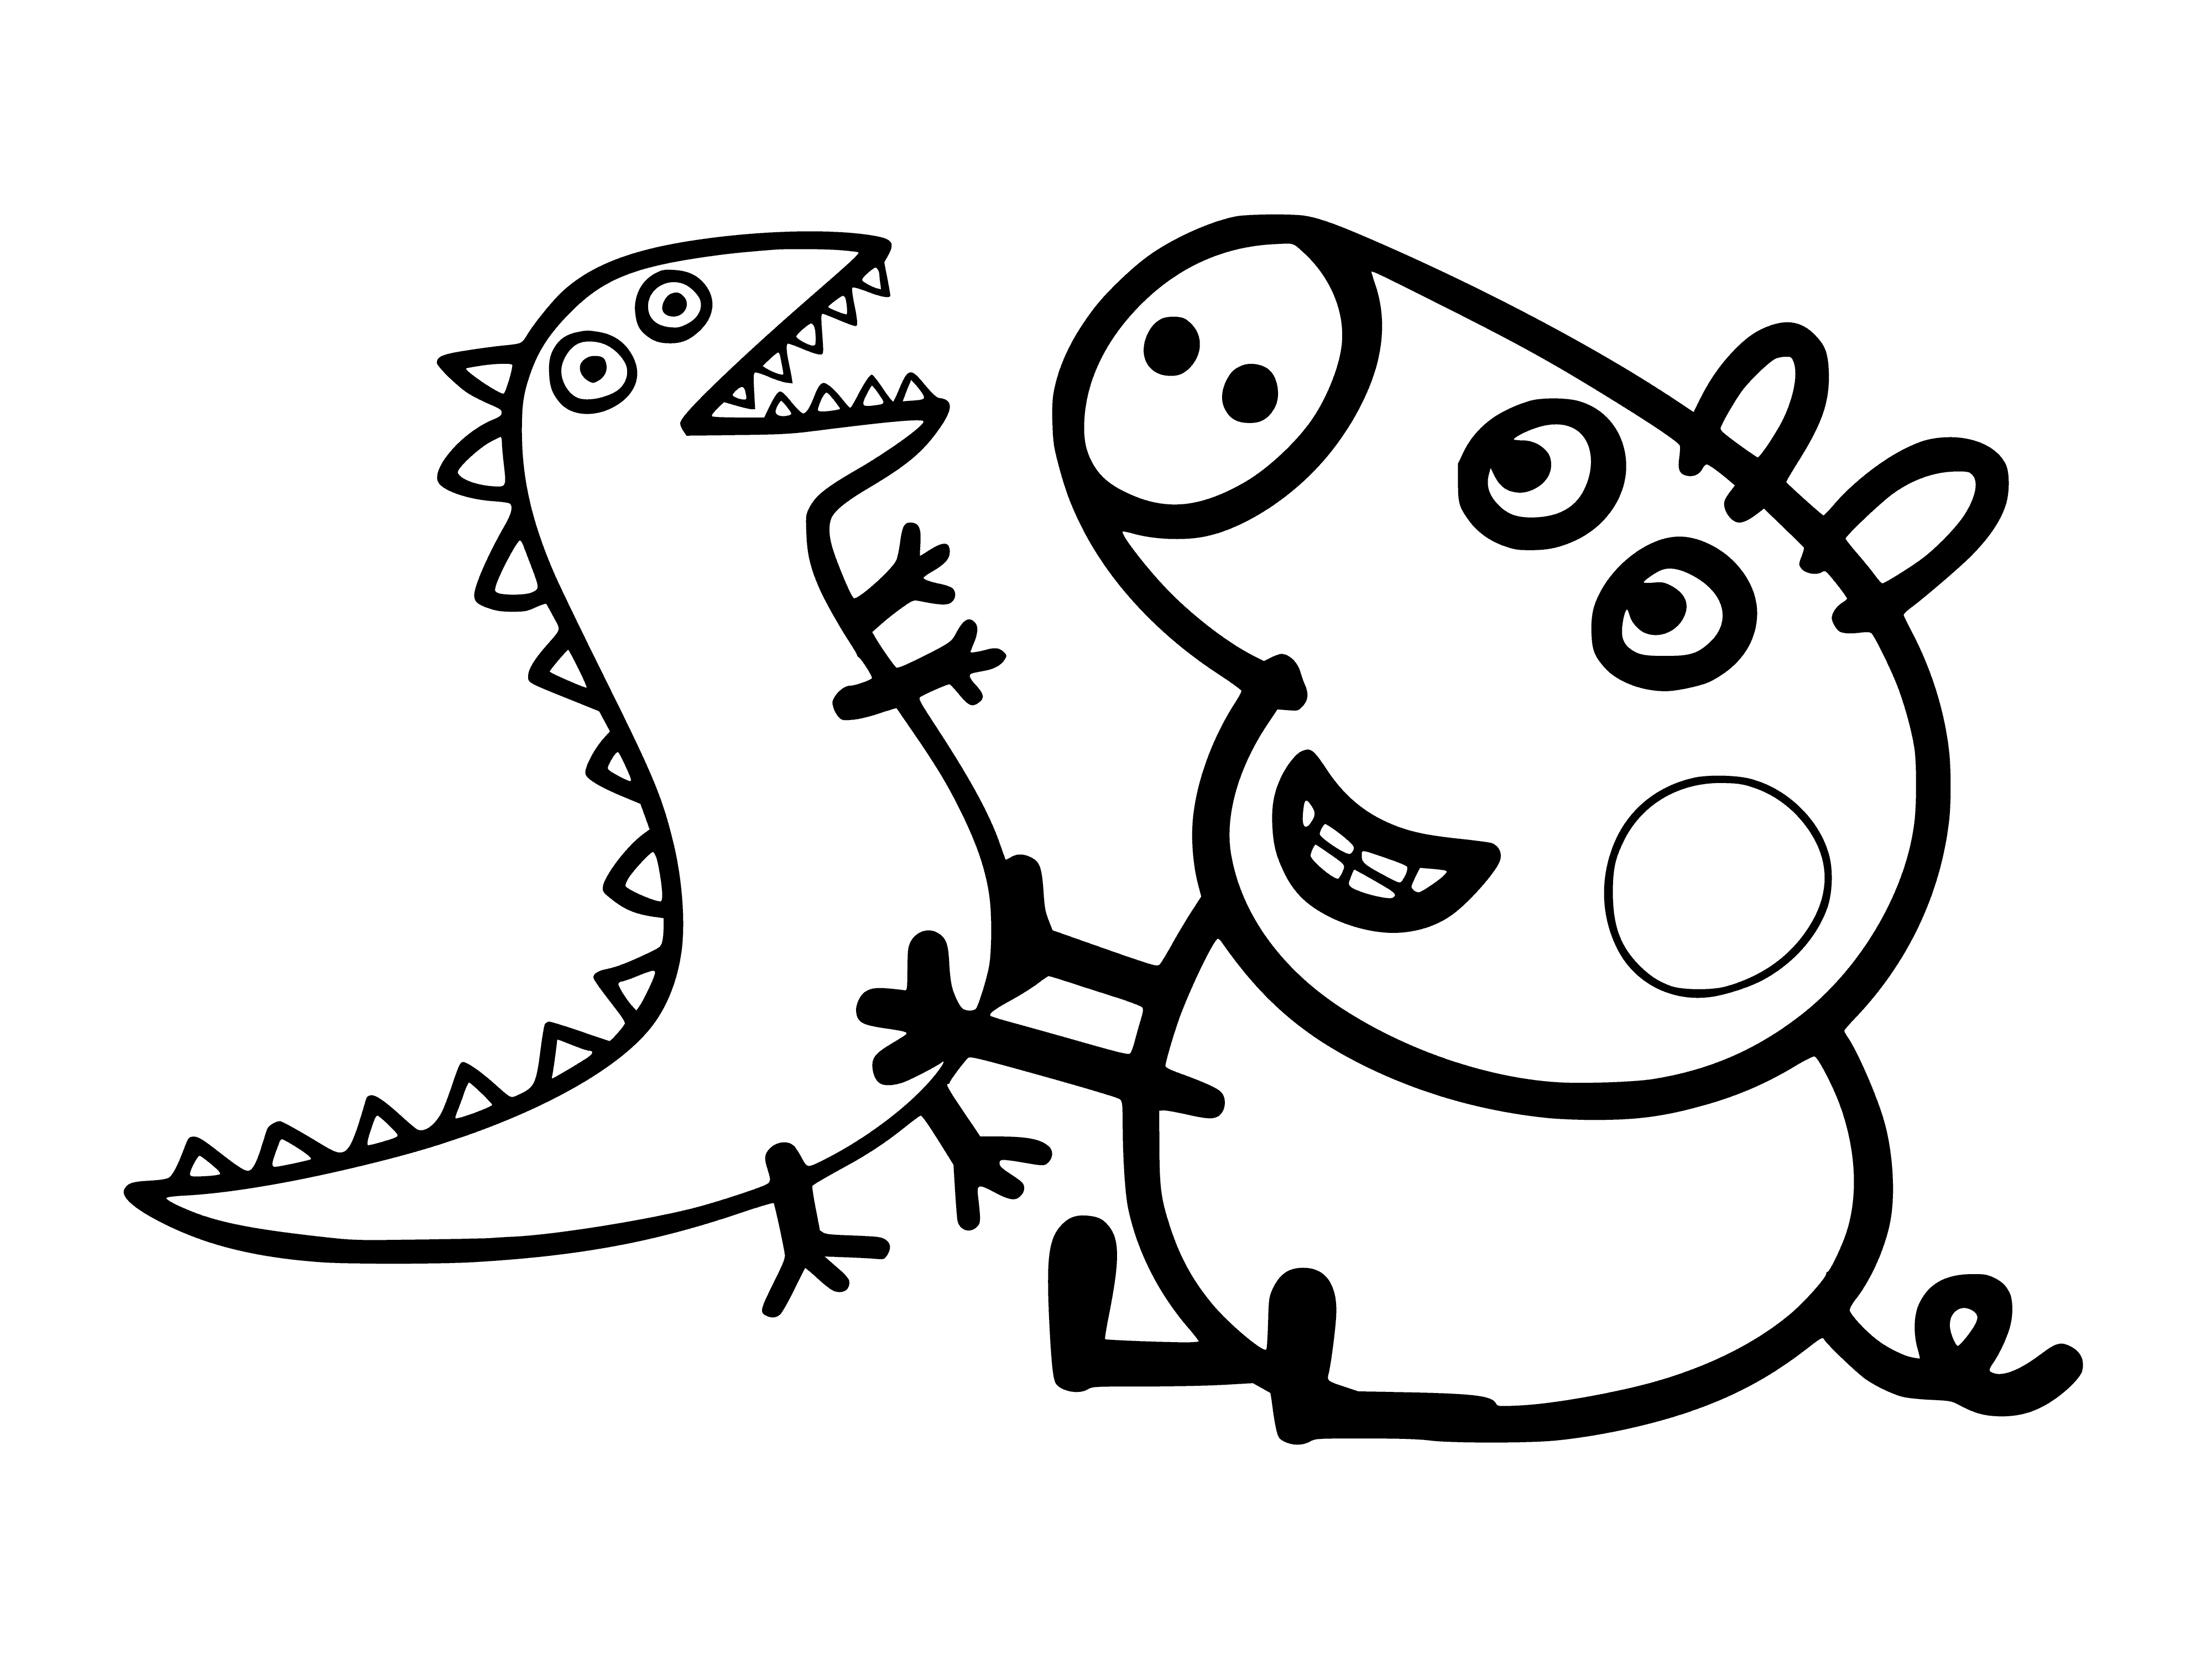 coloring page: Girl & boy pig smile in coloring page, girl holds toy dinosaur. #children #coloring #pigs